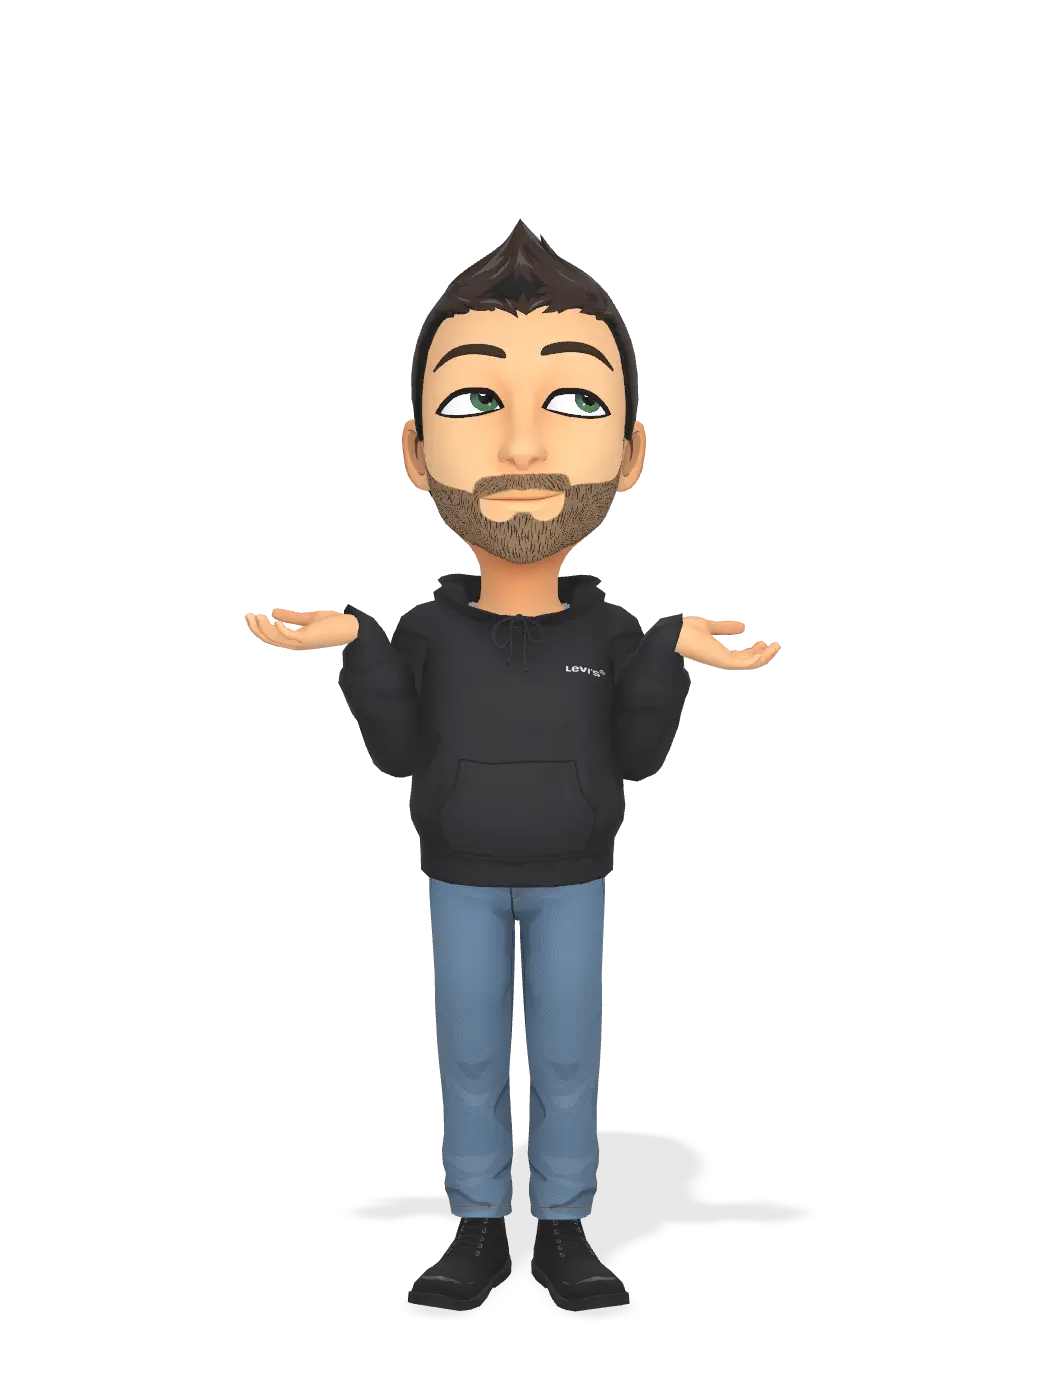 3D Bitmoji for mike_ince